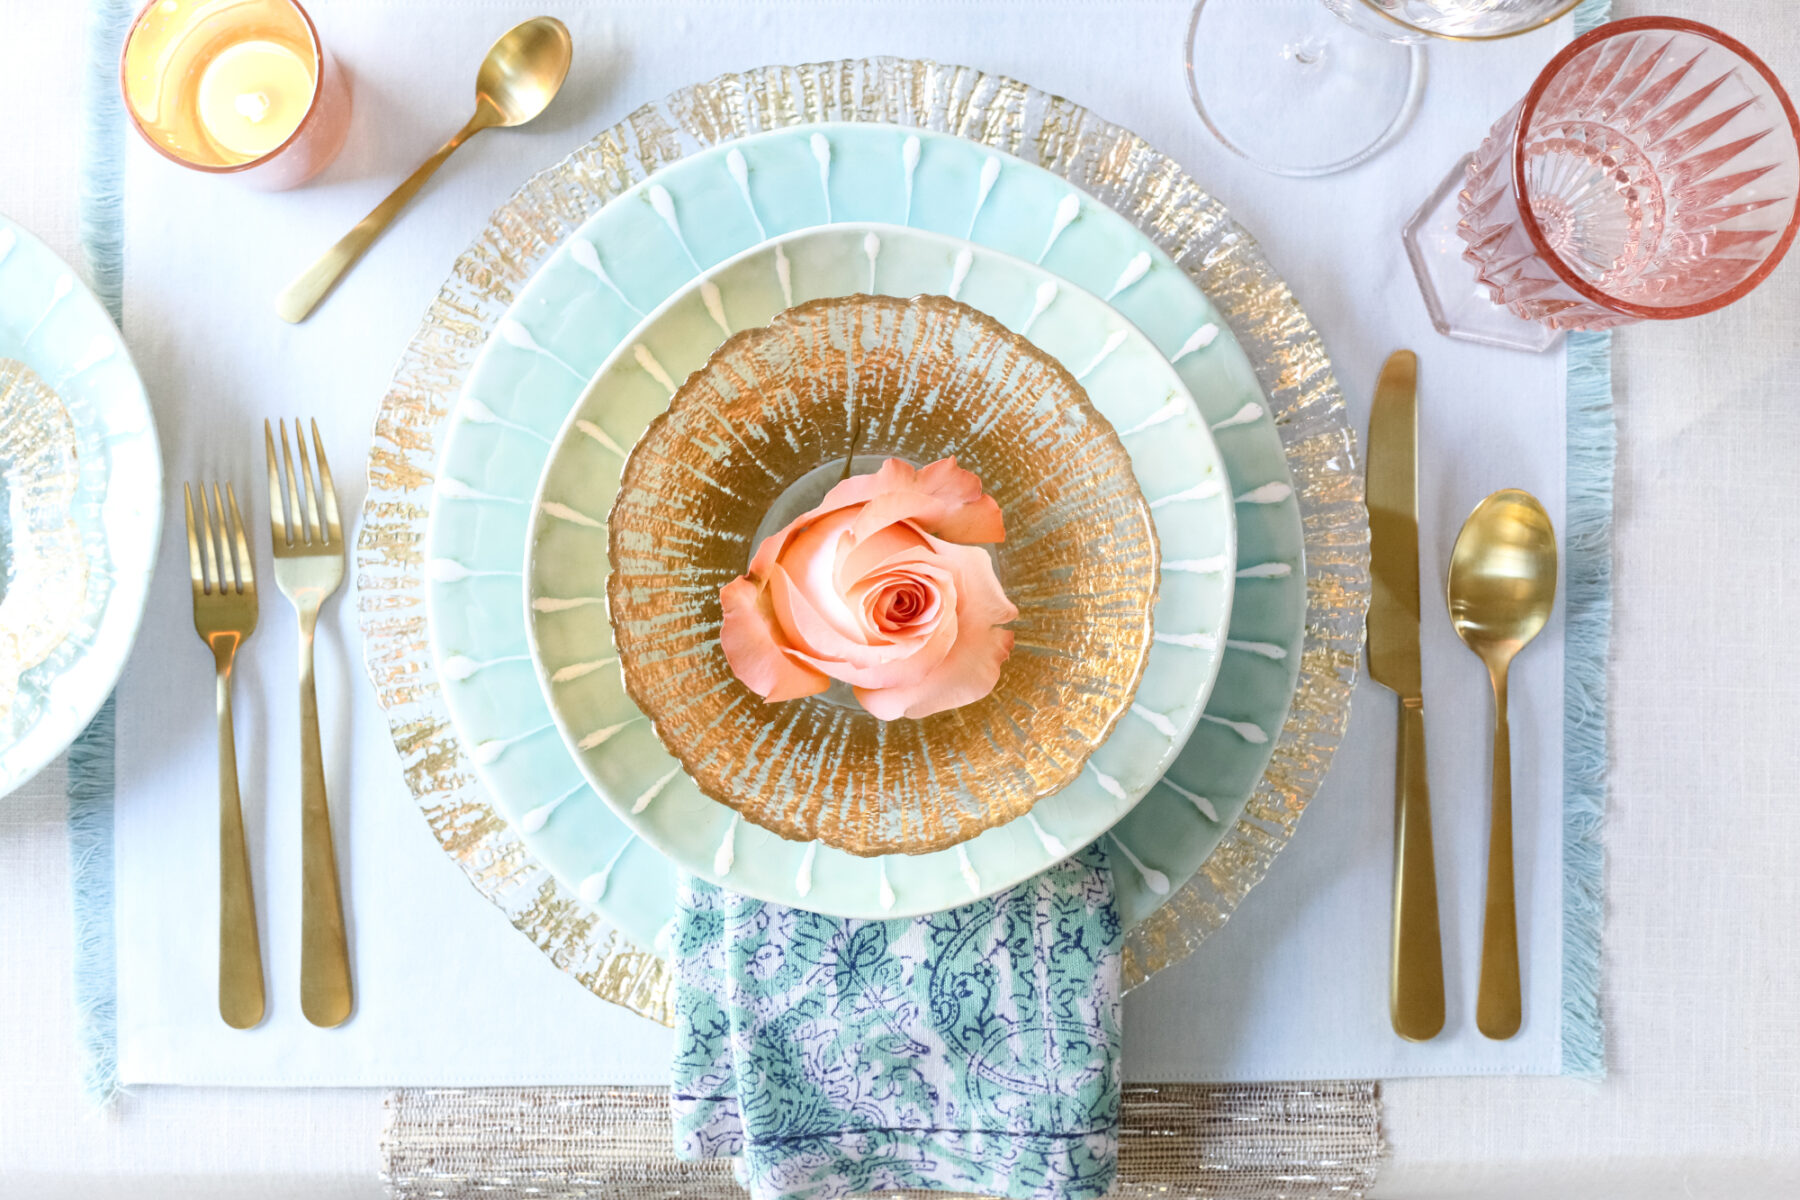 VIETRI - Light Blue Place Setting with Gold Flatware and a Pink Rose